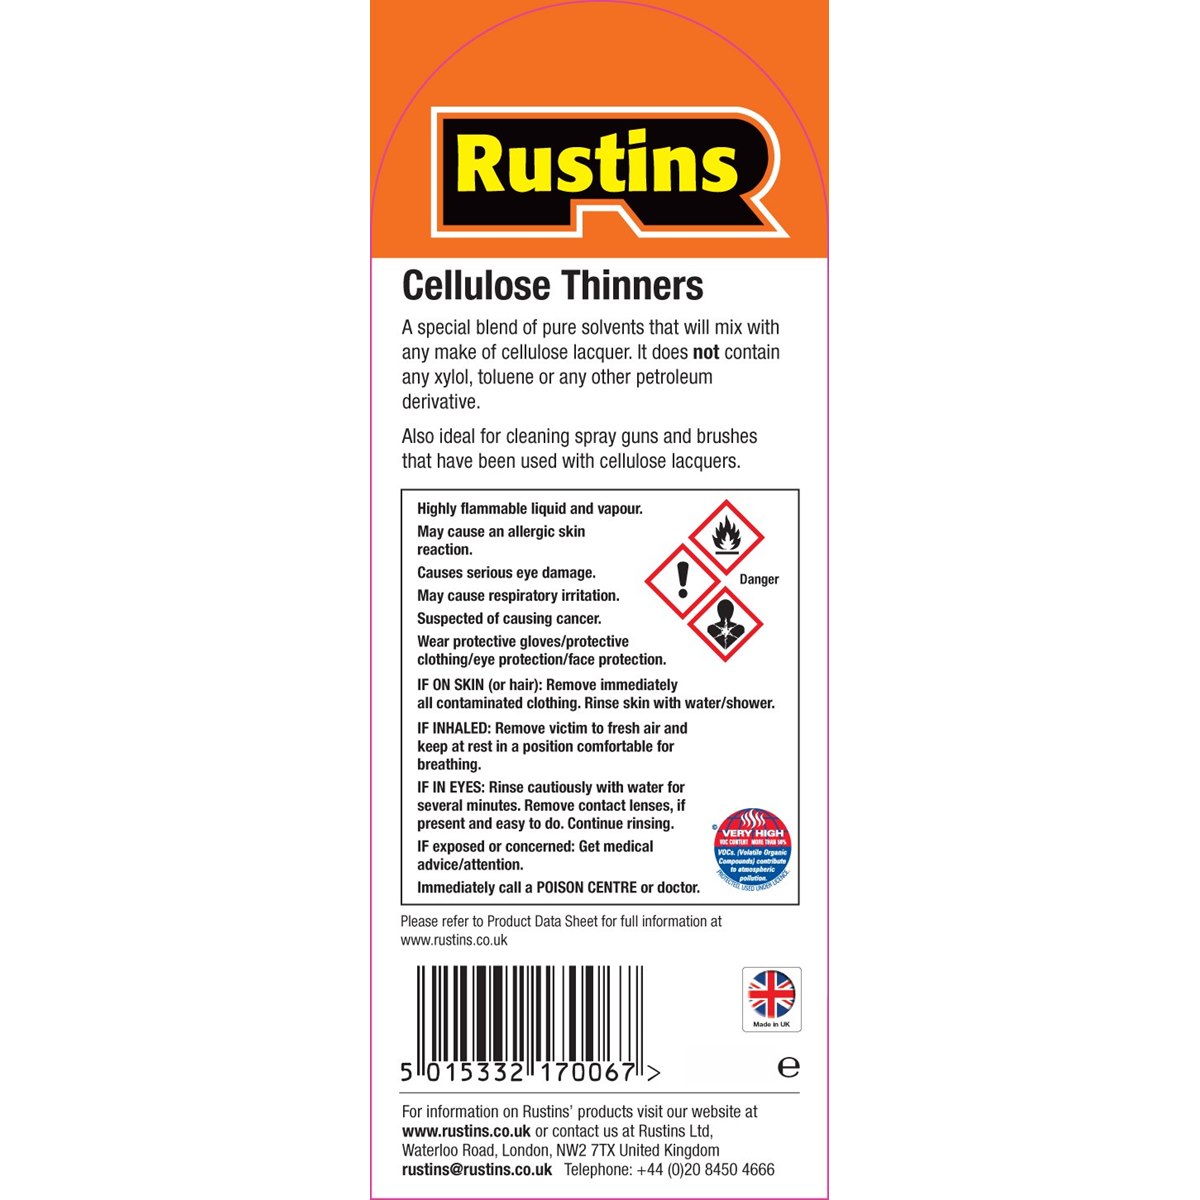 How to use Rustins Cellulose Thinners